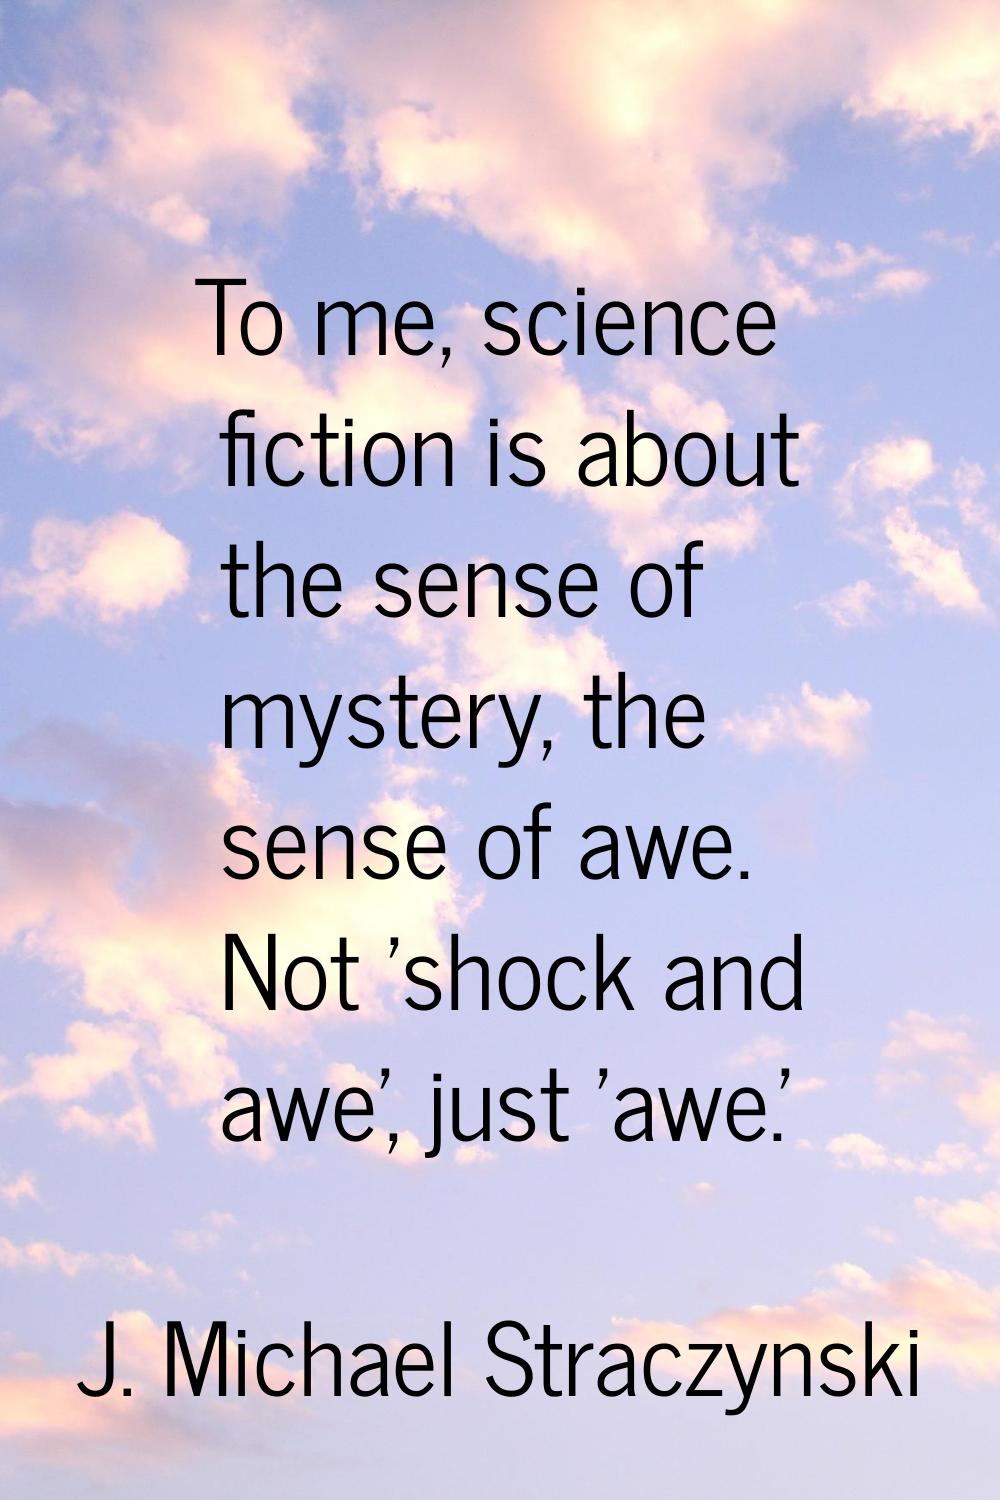 To me, science fiction is about the sense of mystery, the sense of awe. Not 'shock and awe', just '